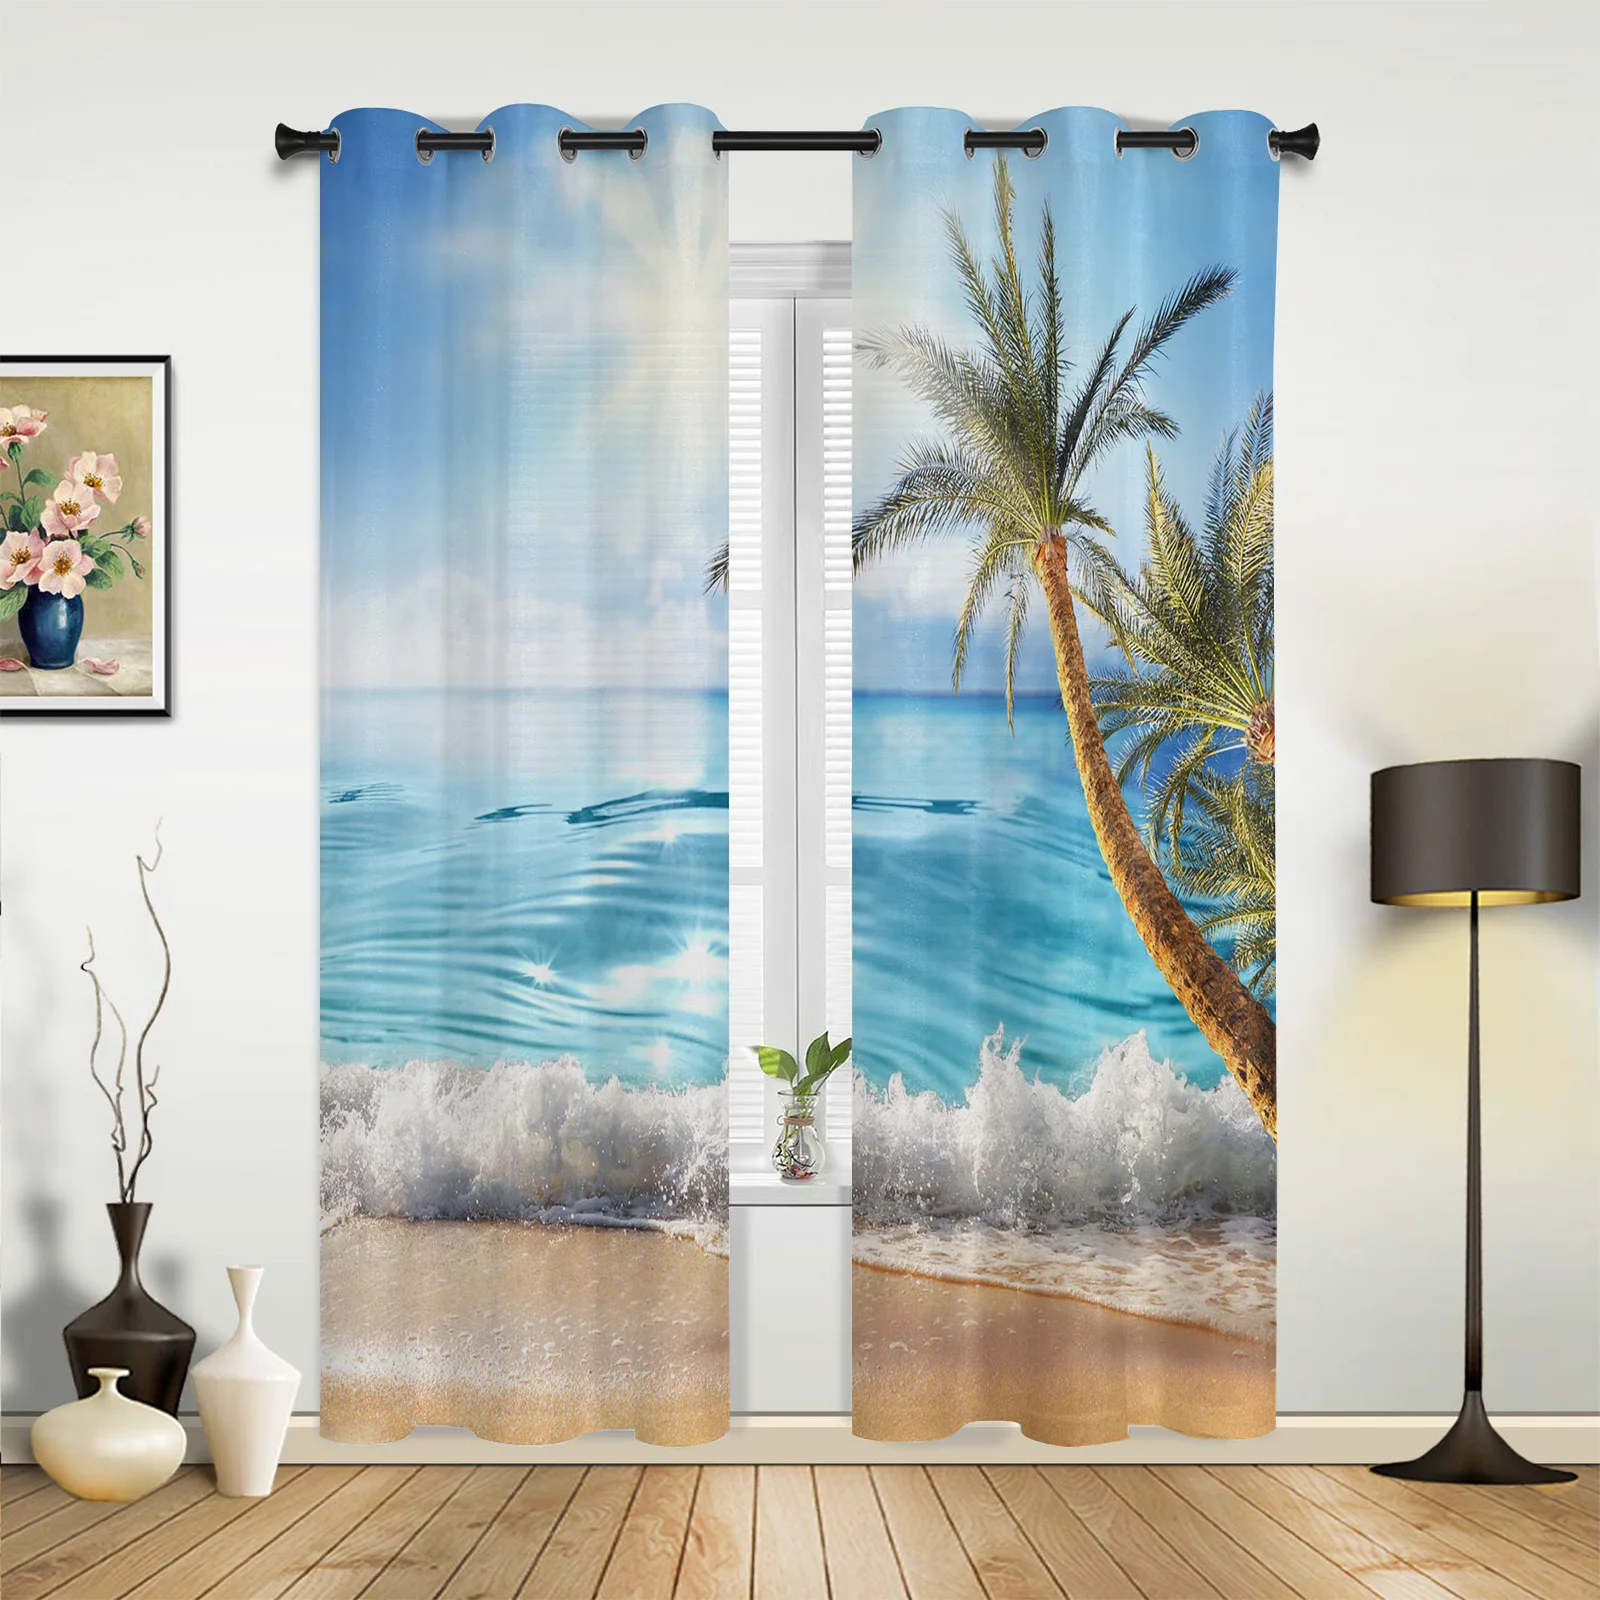 

Beach Waves Coconut Trees Curtains for Bedroom Living Room Drapes Kitchen Children's Room Window Curtain Modern Home Decor